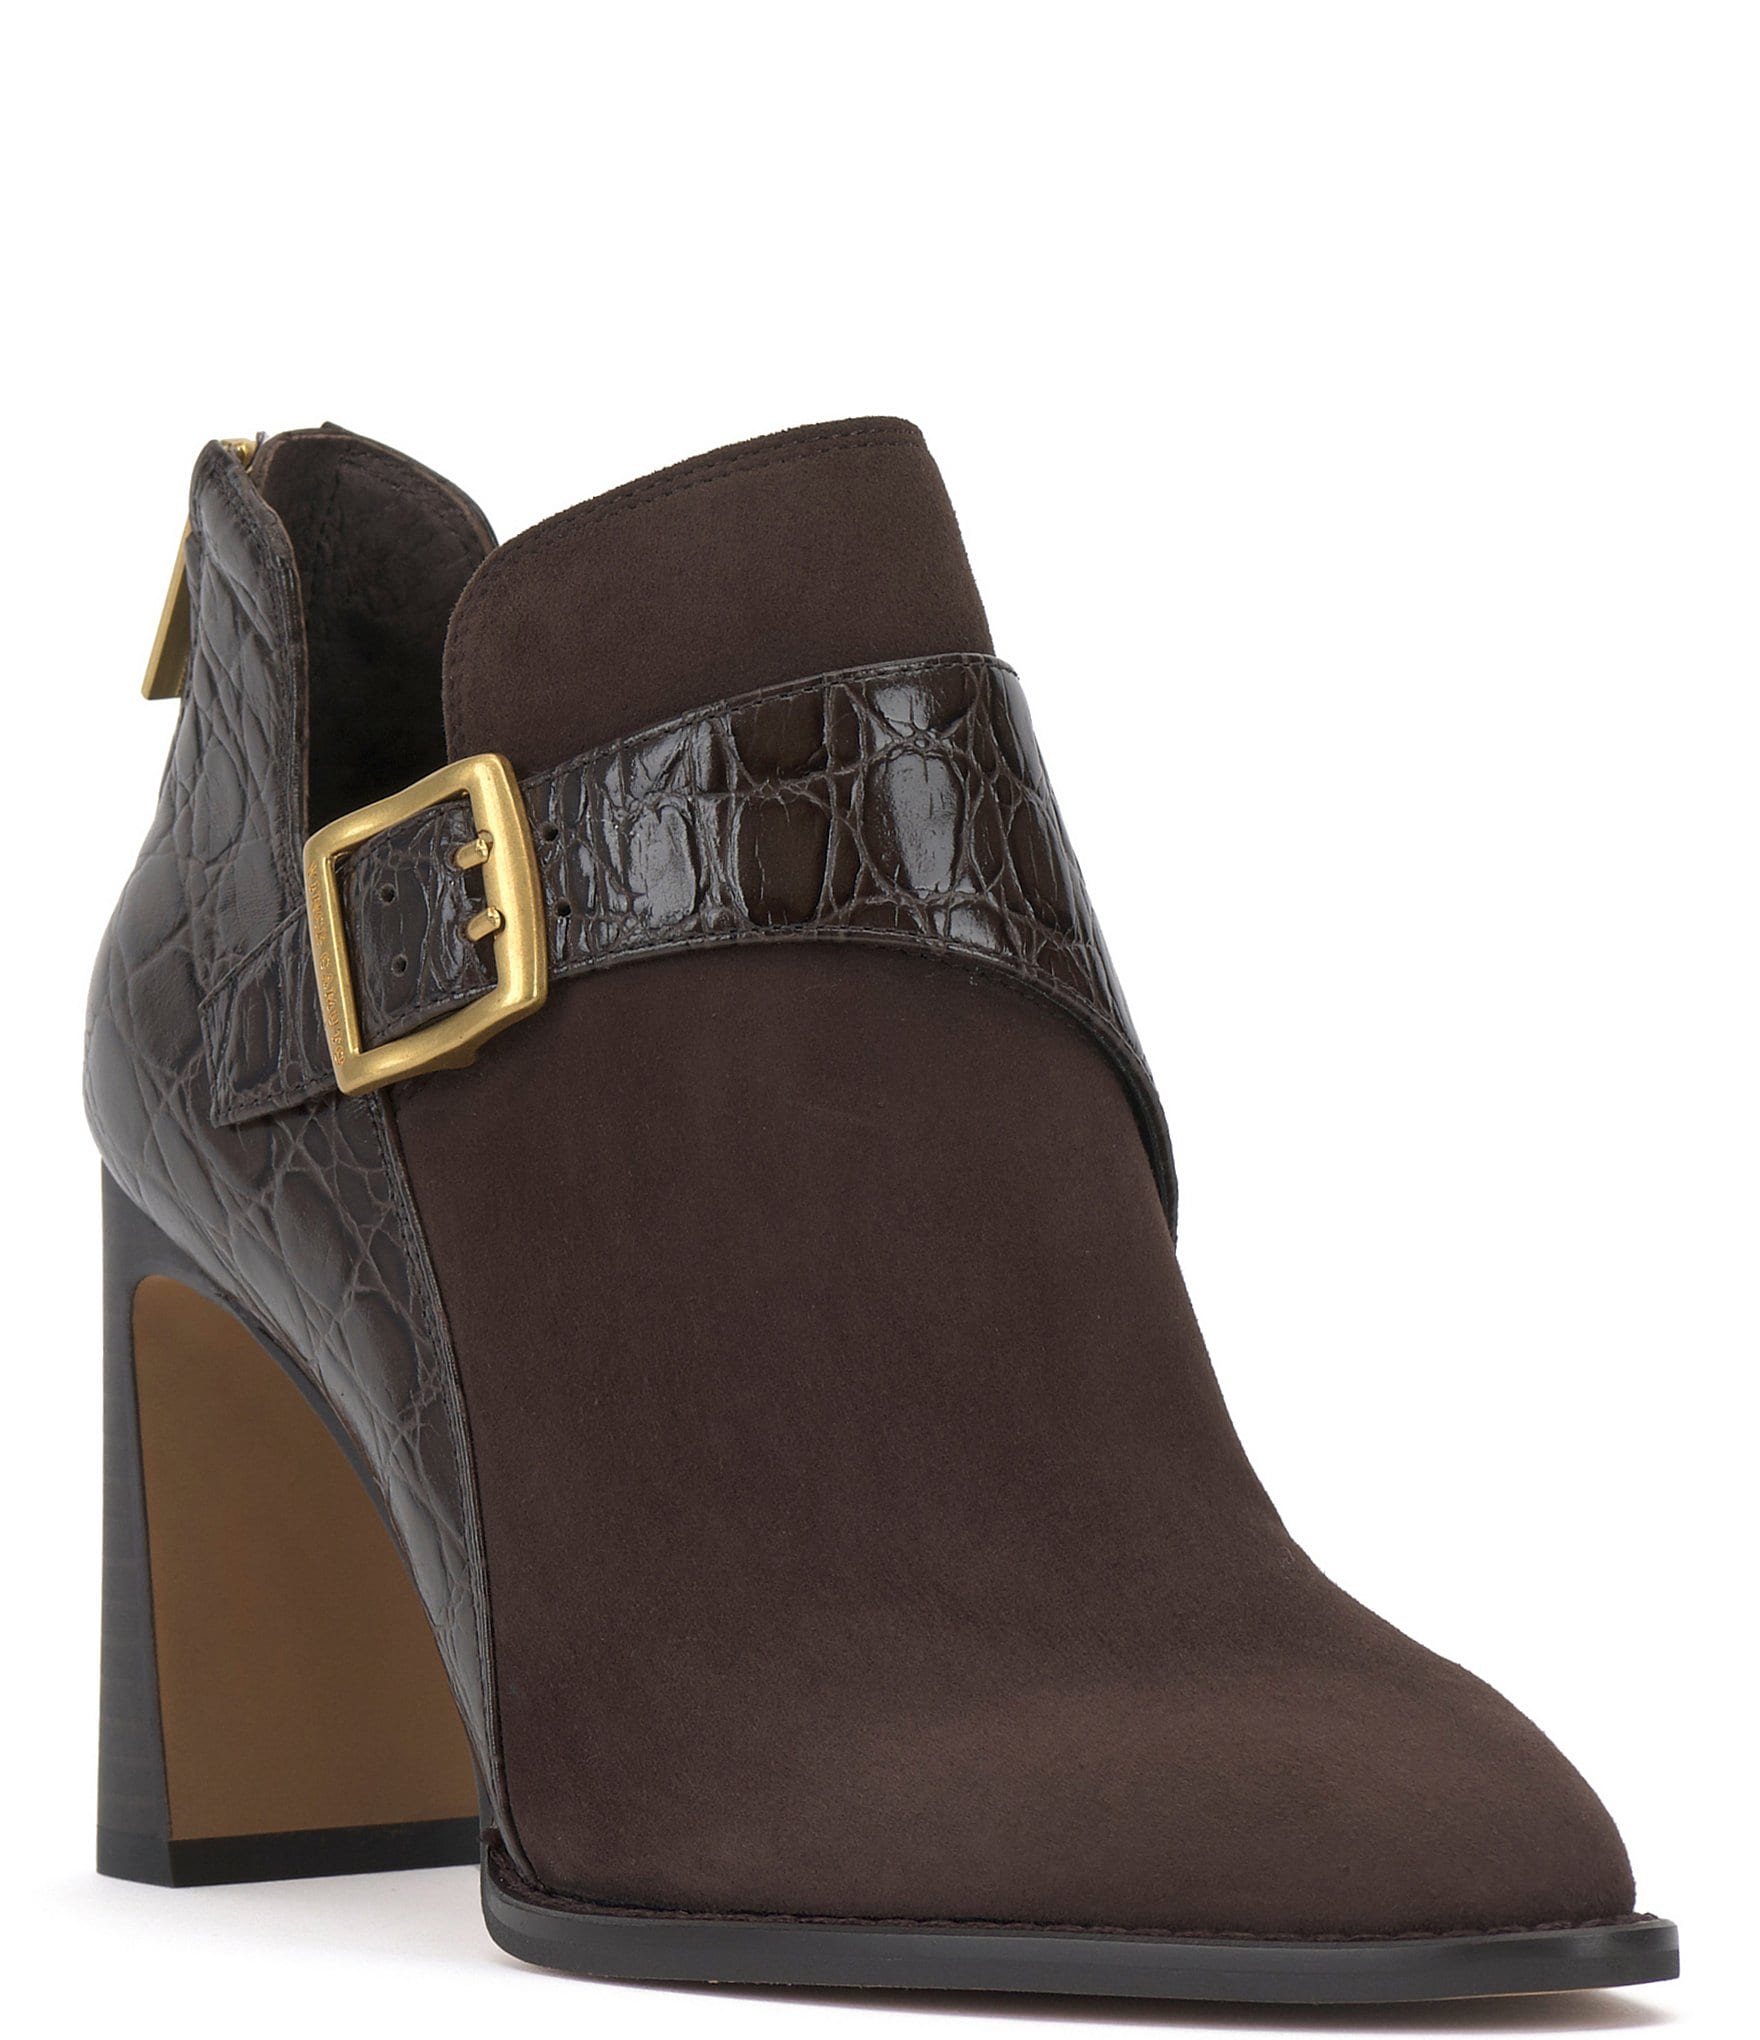 Vince Camuto Deninna Suede Crocodile Print Accent Booties - 6M